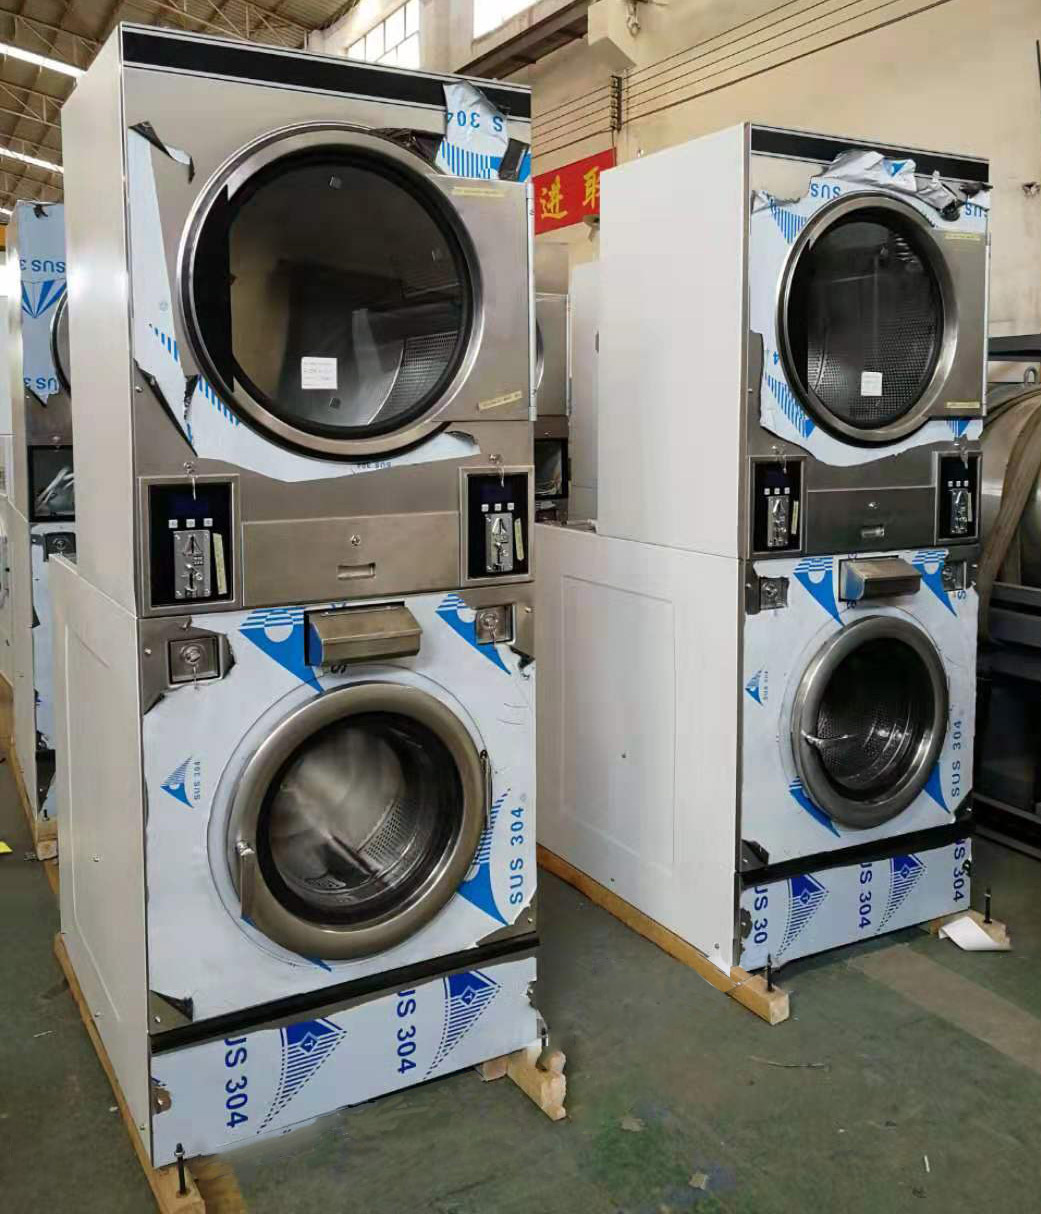 automatic self service laundry equipment combo natural gas heating for service-service center